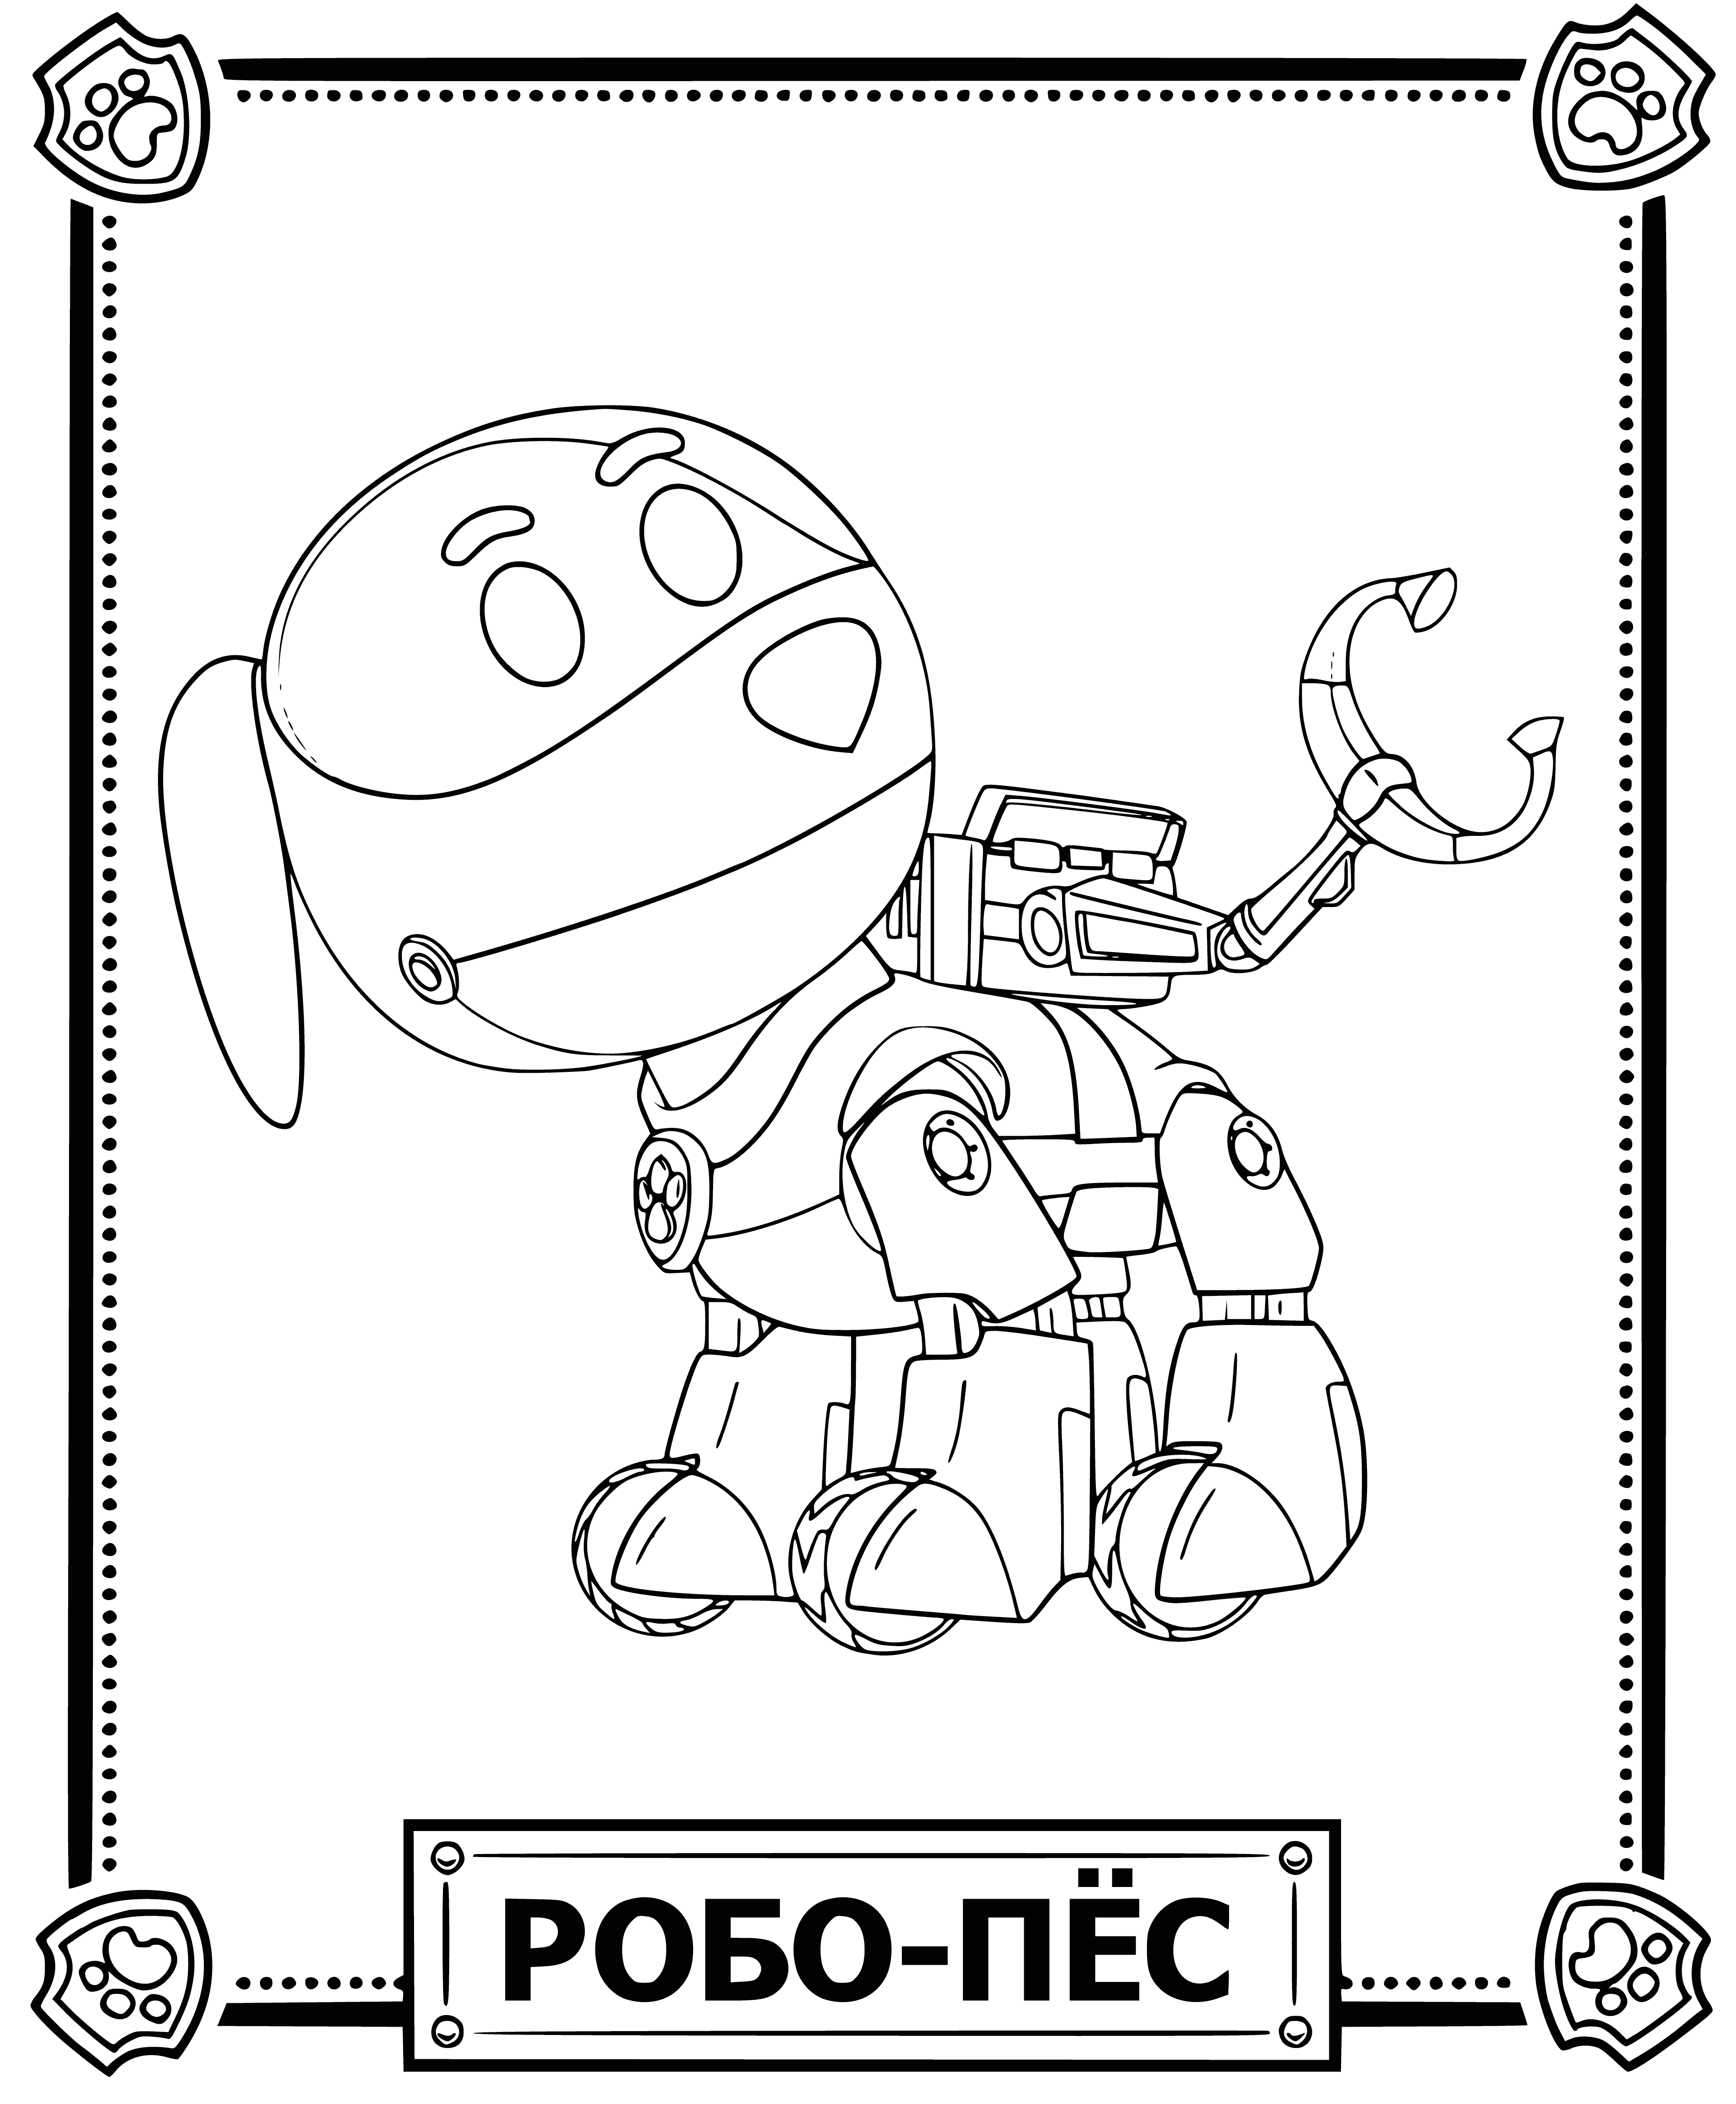 coloring page: Robotic dog from PAW Patrol ready for action! He has yellow body, red collar, blue eyes and a friendly expression.